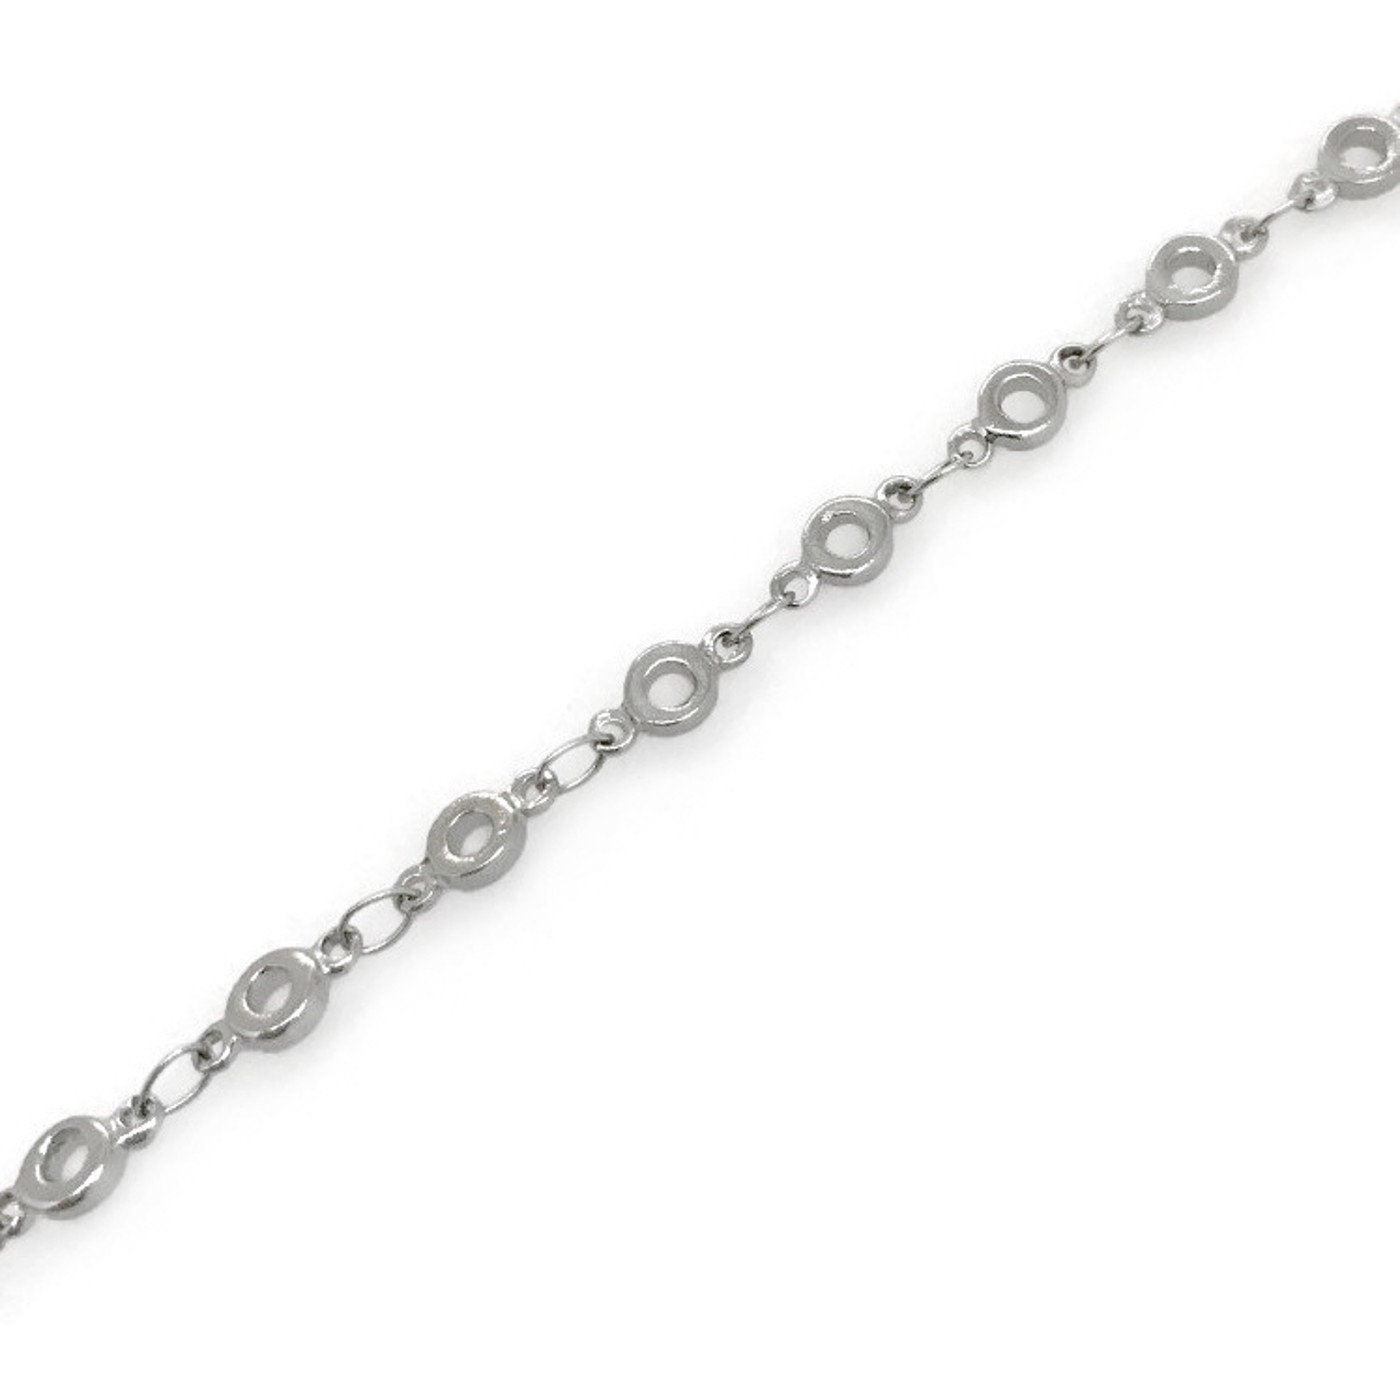 Thin Open Circle Chain Bracelet, Stainless Steel Jewelry for Women,  Adjustable Charm Bracelet, Stackable Wrist Candy